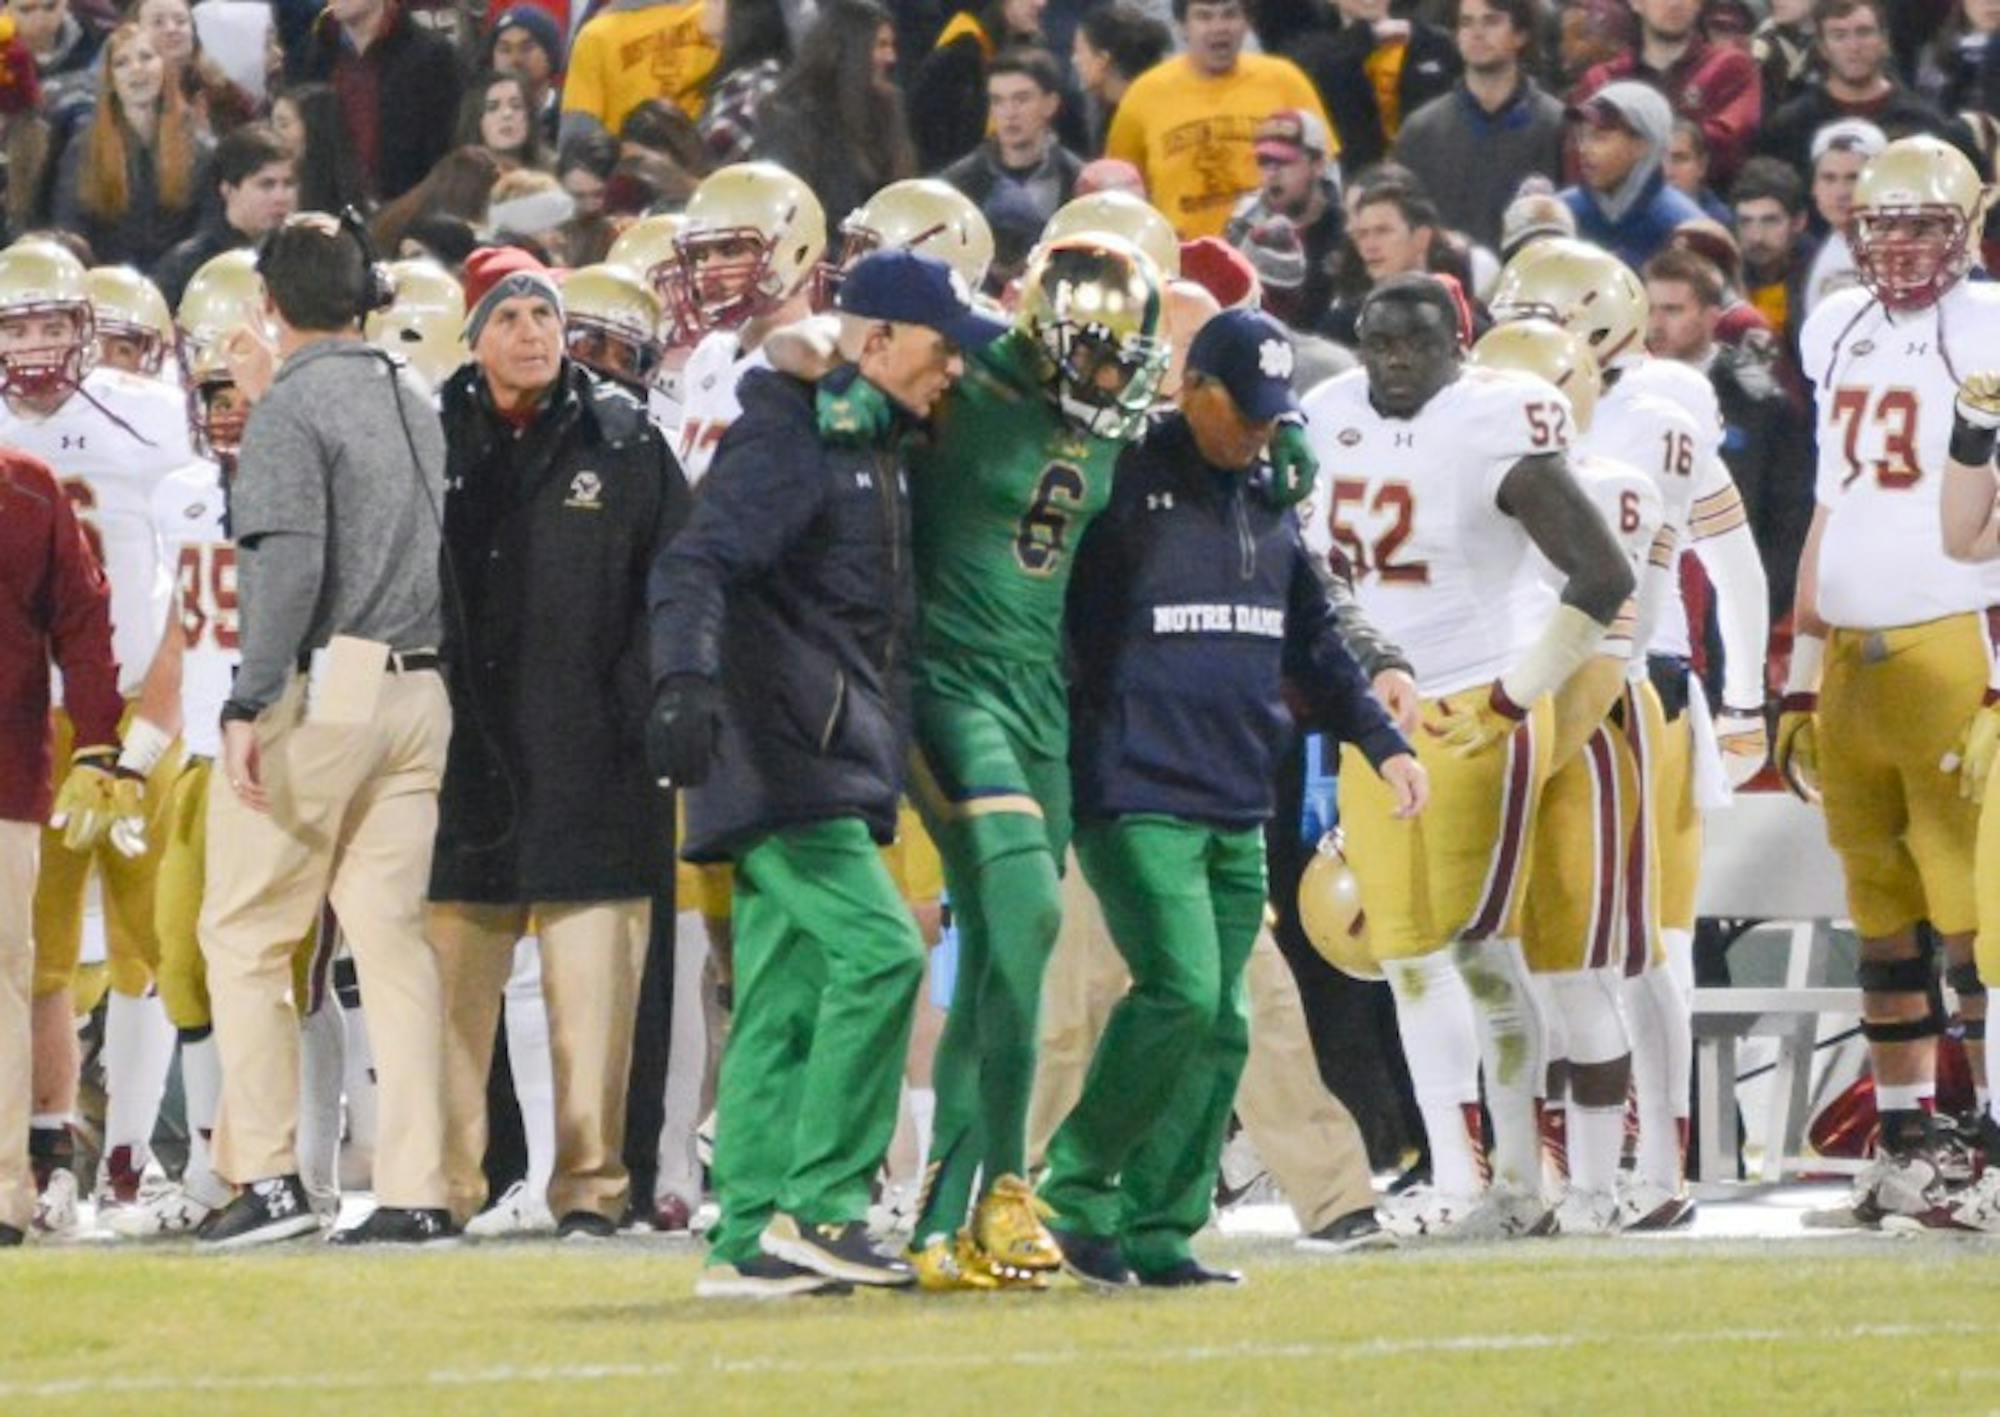 Senior cornerback KeiVarae Russell is helped off the field during Notre Dame’s 19-16 victory over Boston College on Saturday. Russell was diagnosed with a broken tibia and is out for six to eight weeks.